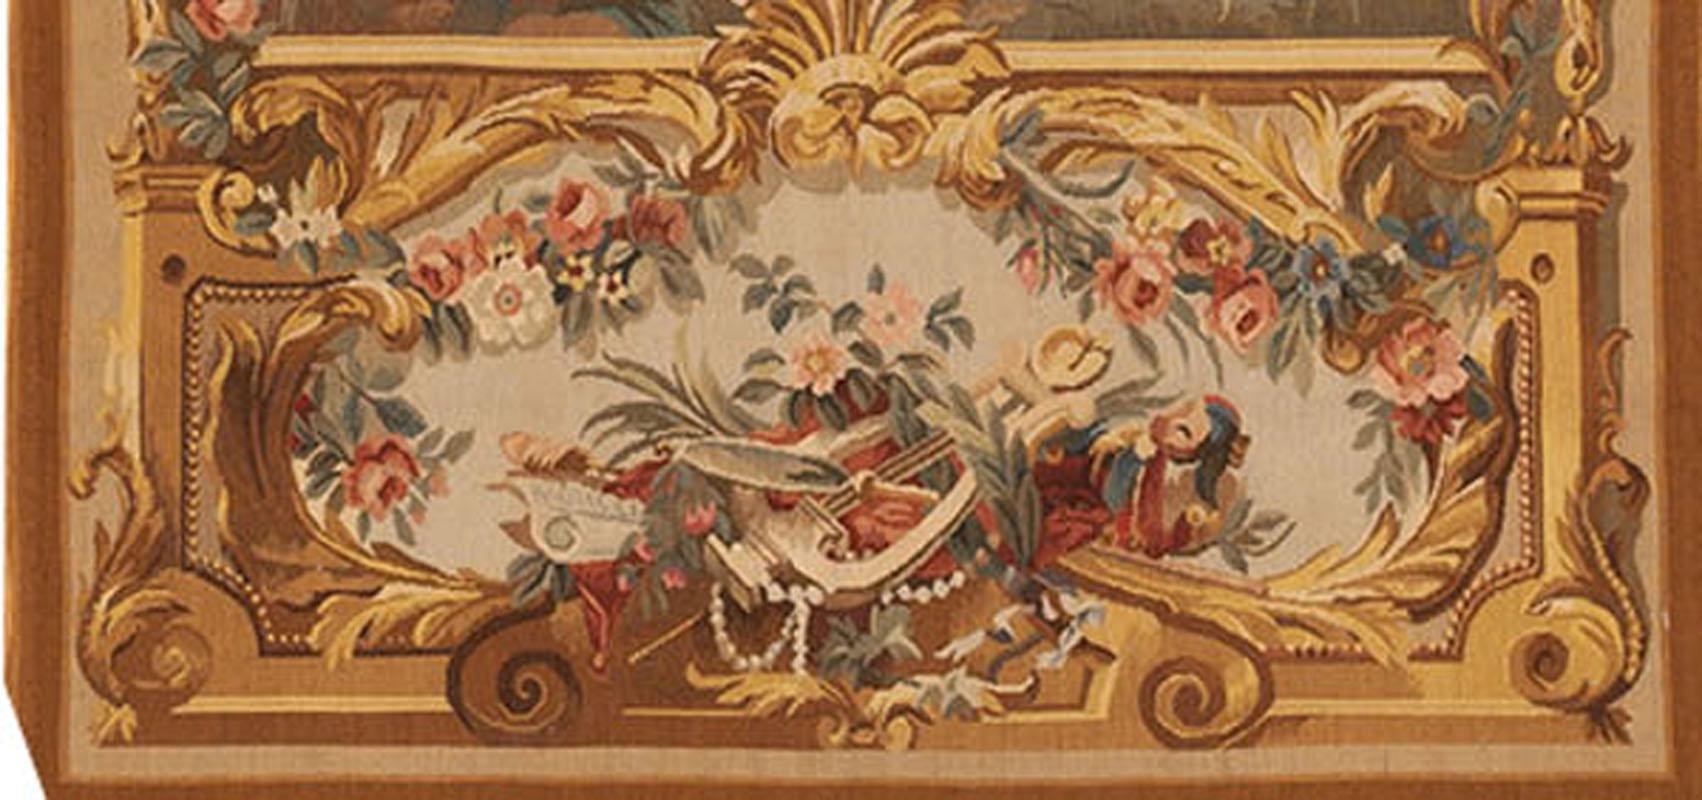 Courtesans Au Parc. 18th century design tapestry panel. The flute player seated, creating the music for the young couple to dance to. All in a wonderful French countryside setting. 3'4 wide x 11'3 high